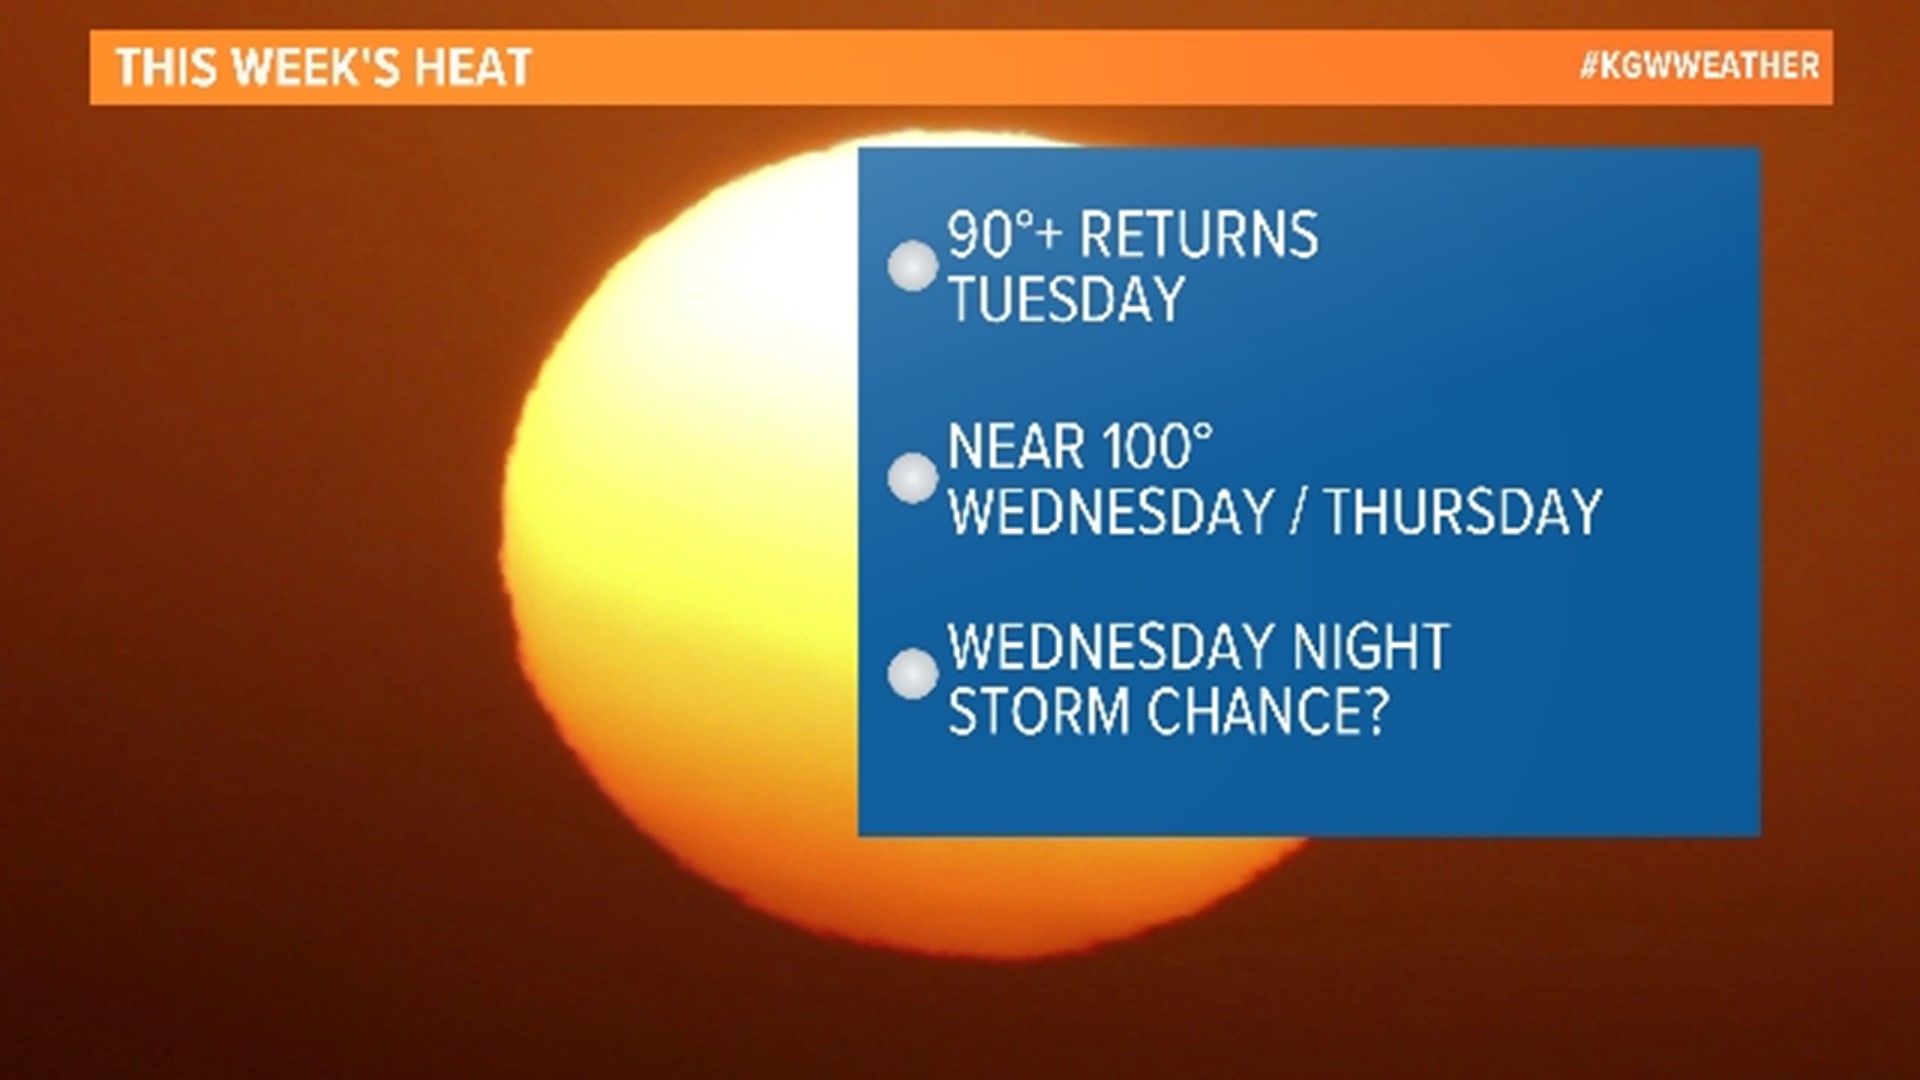 The Portland area could see a two to three day stretch of hot weather this week. High temperatures could reach near 100 degrees on Wednesday and possibly Thursday.